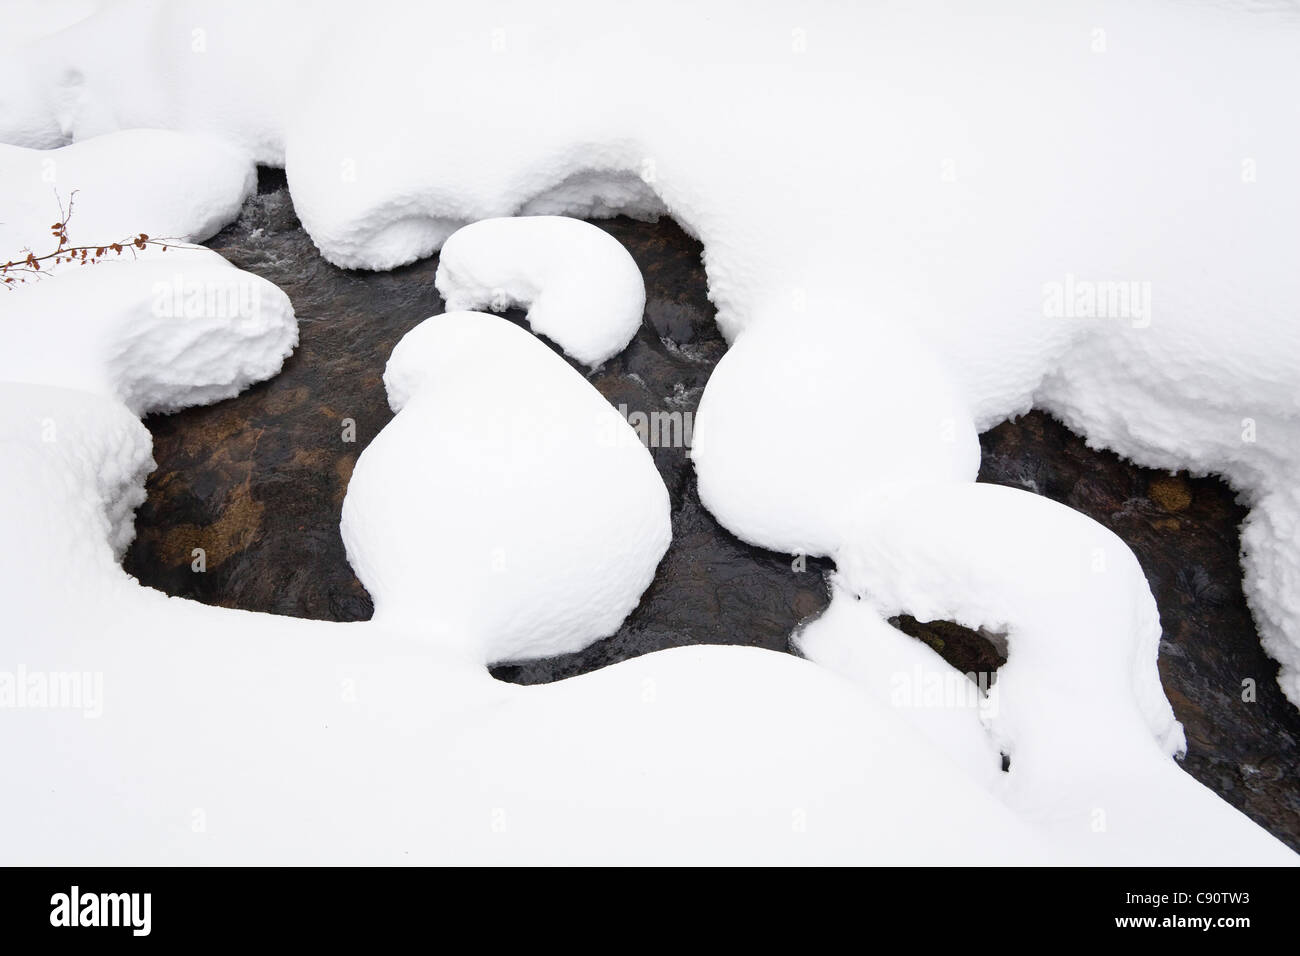 Creek Kleine Ohe with deep snow in winter, Bavarian Forest National Park, Lower Bavaria, Germany, Europe Stock Photo